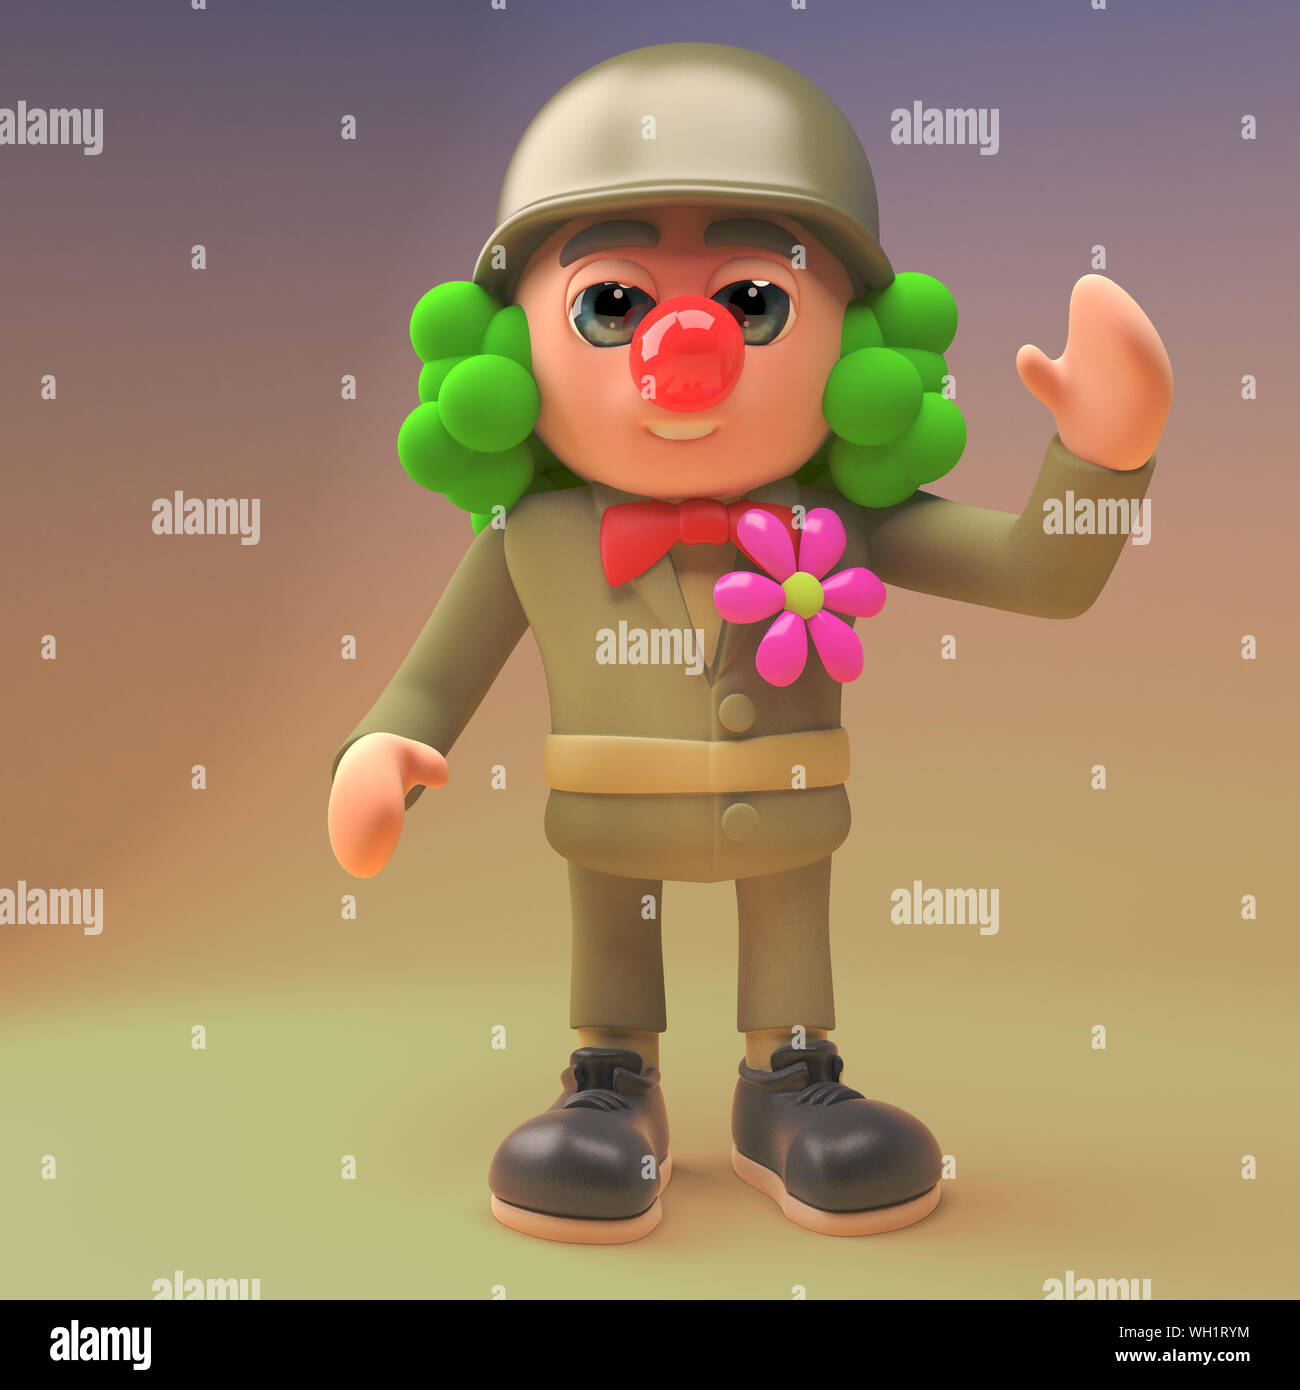 3d cartoon army soldier in military uniform wearing a clown wig and red nose, 3d illustration render Stock Photo